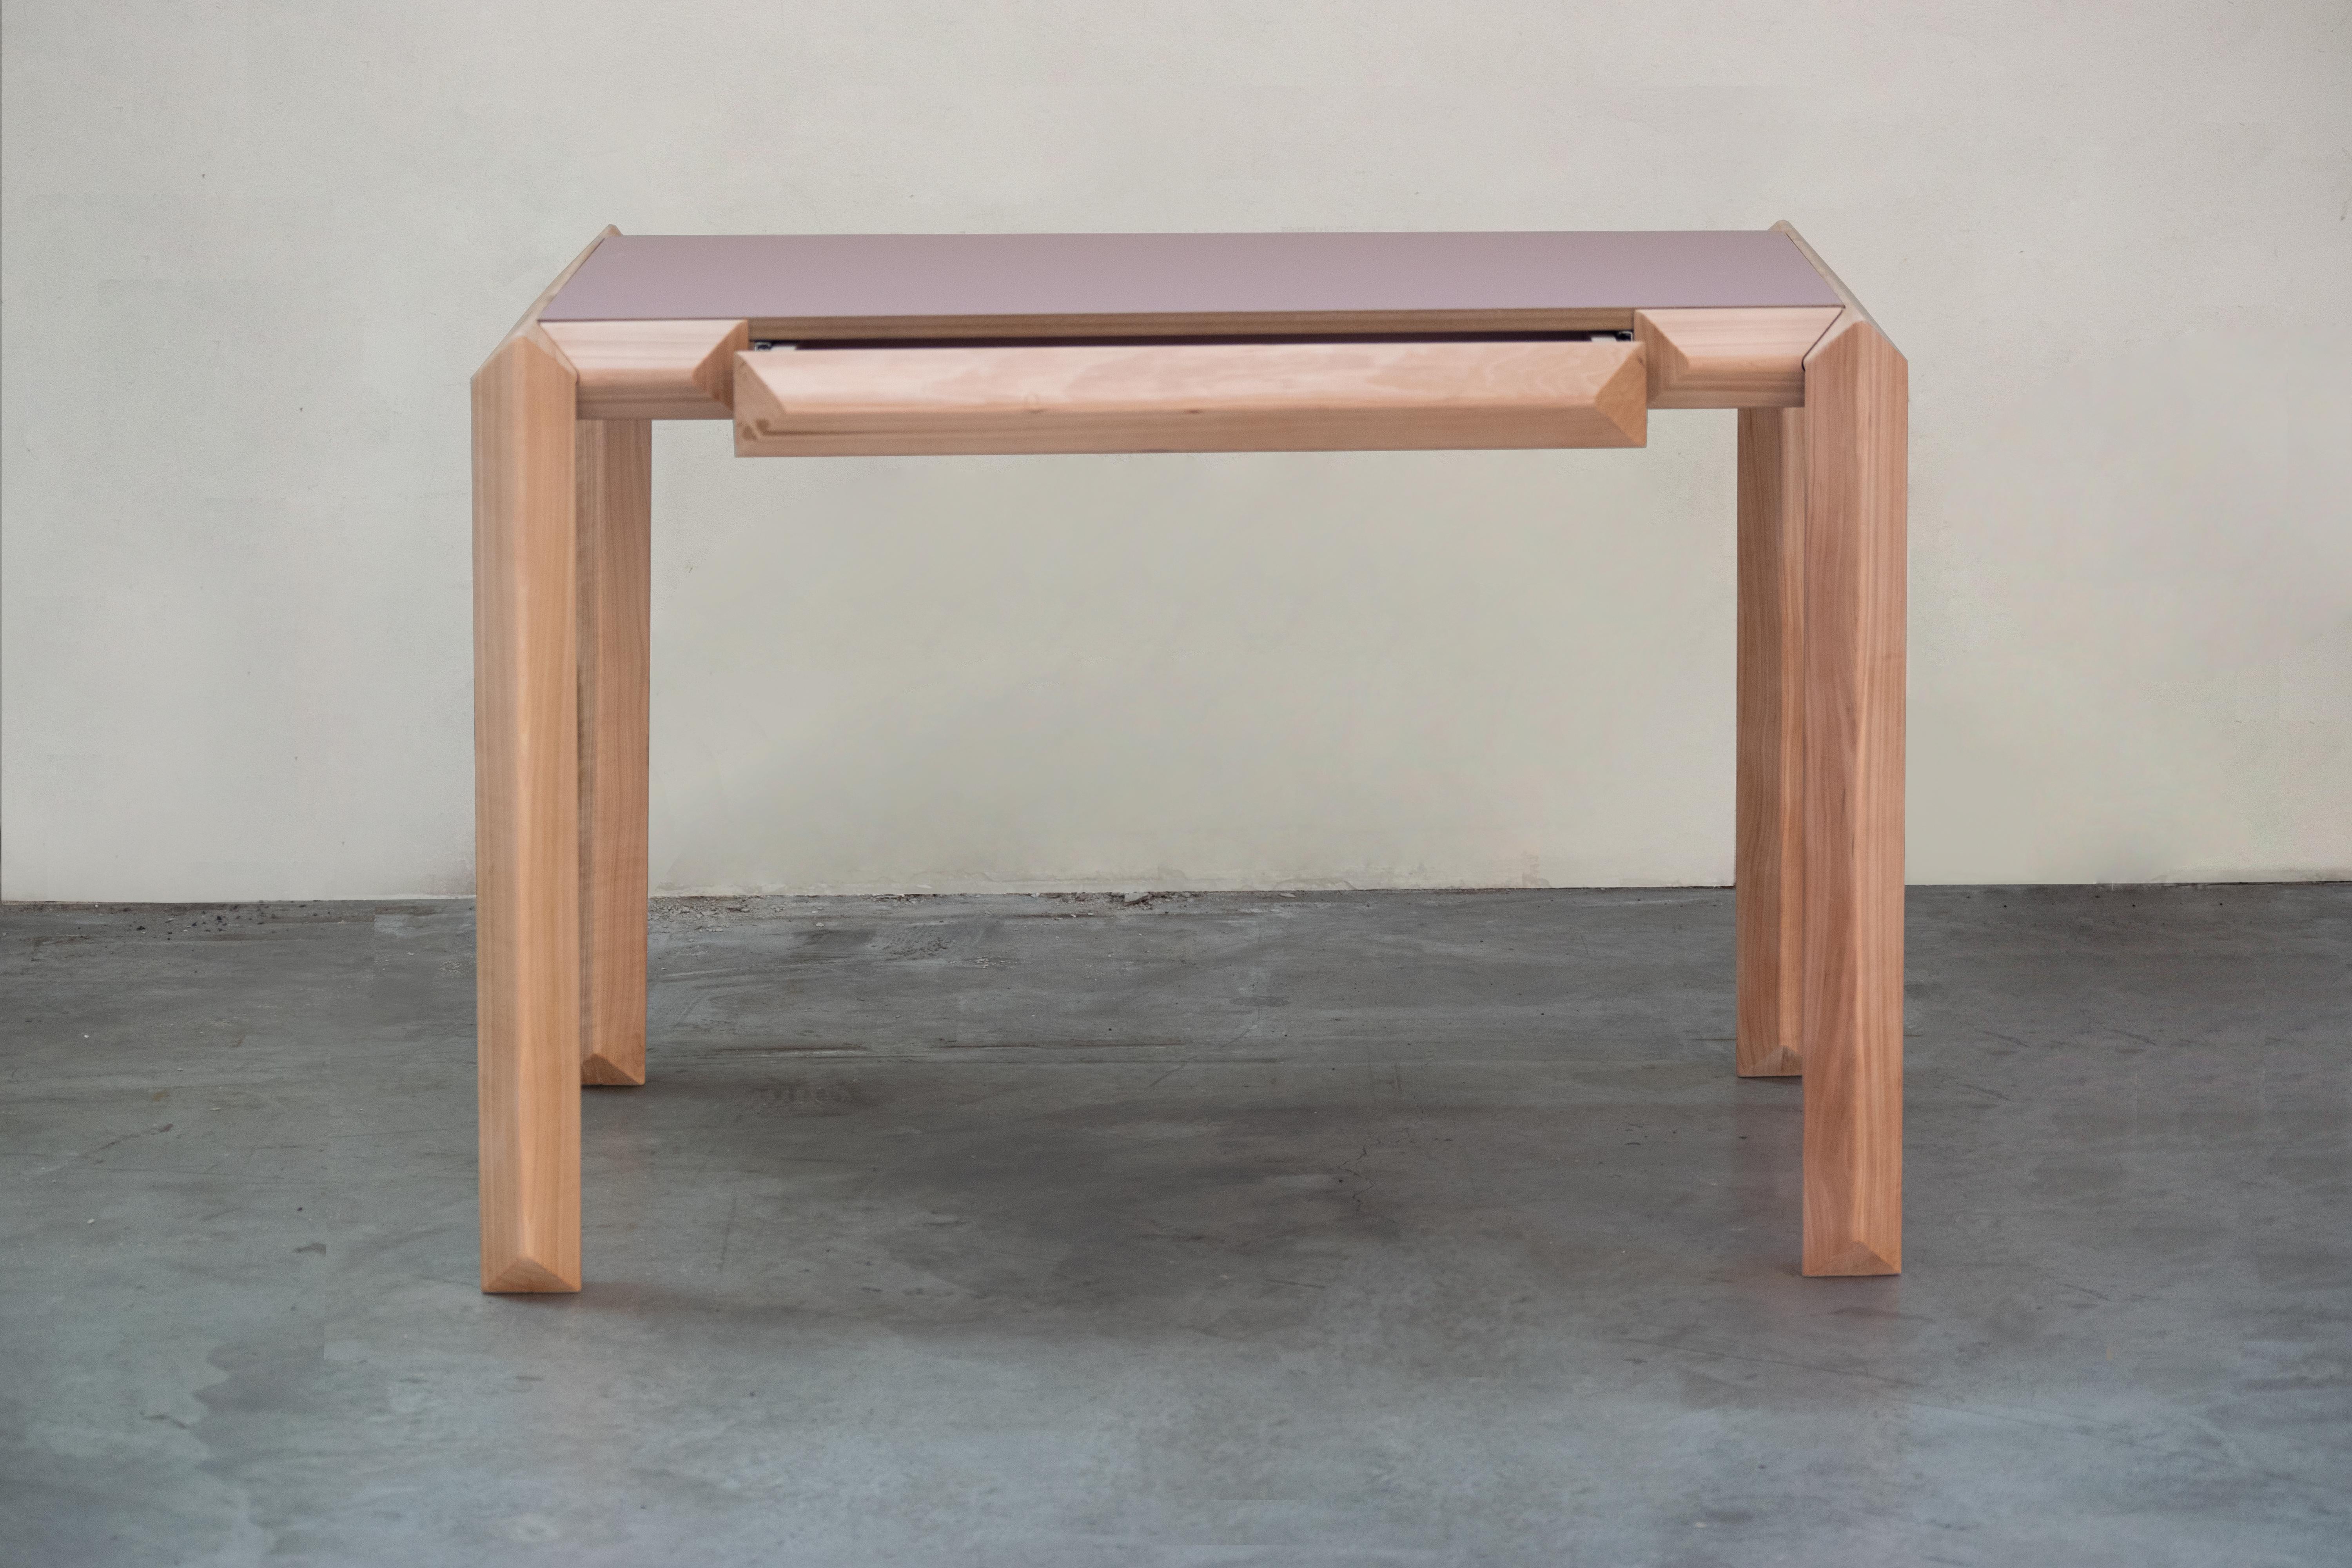 Launched at the ICFF - Wanted design fair in 2022, during the New York design week, the table - desk brings a warm solution to new insulation needs at a home working space through the use of wood in its natural color. 
It’s presented as a solid